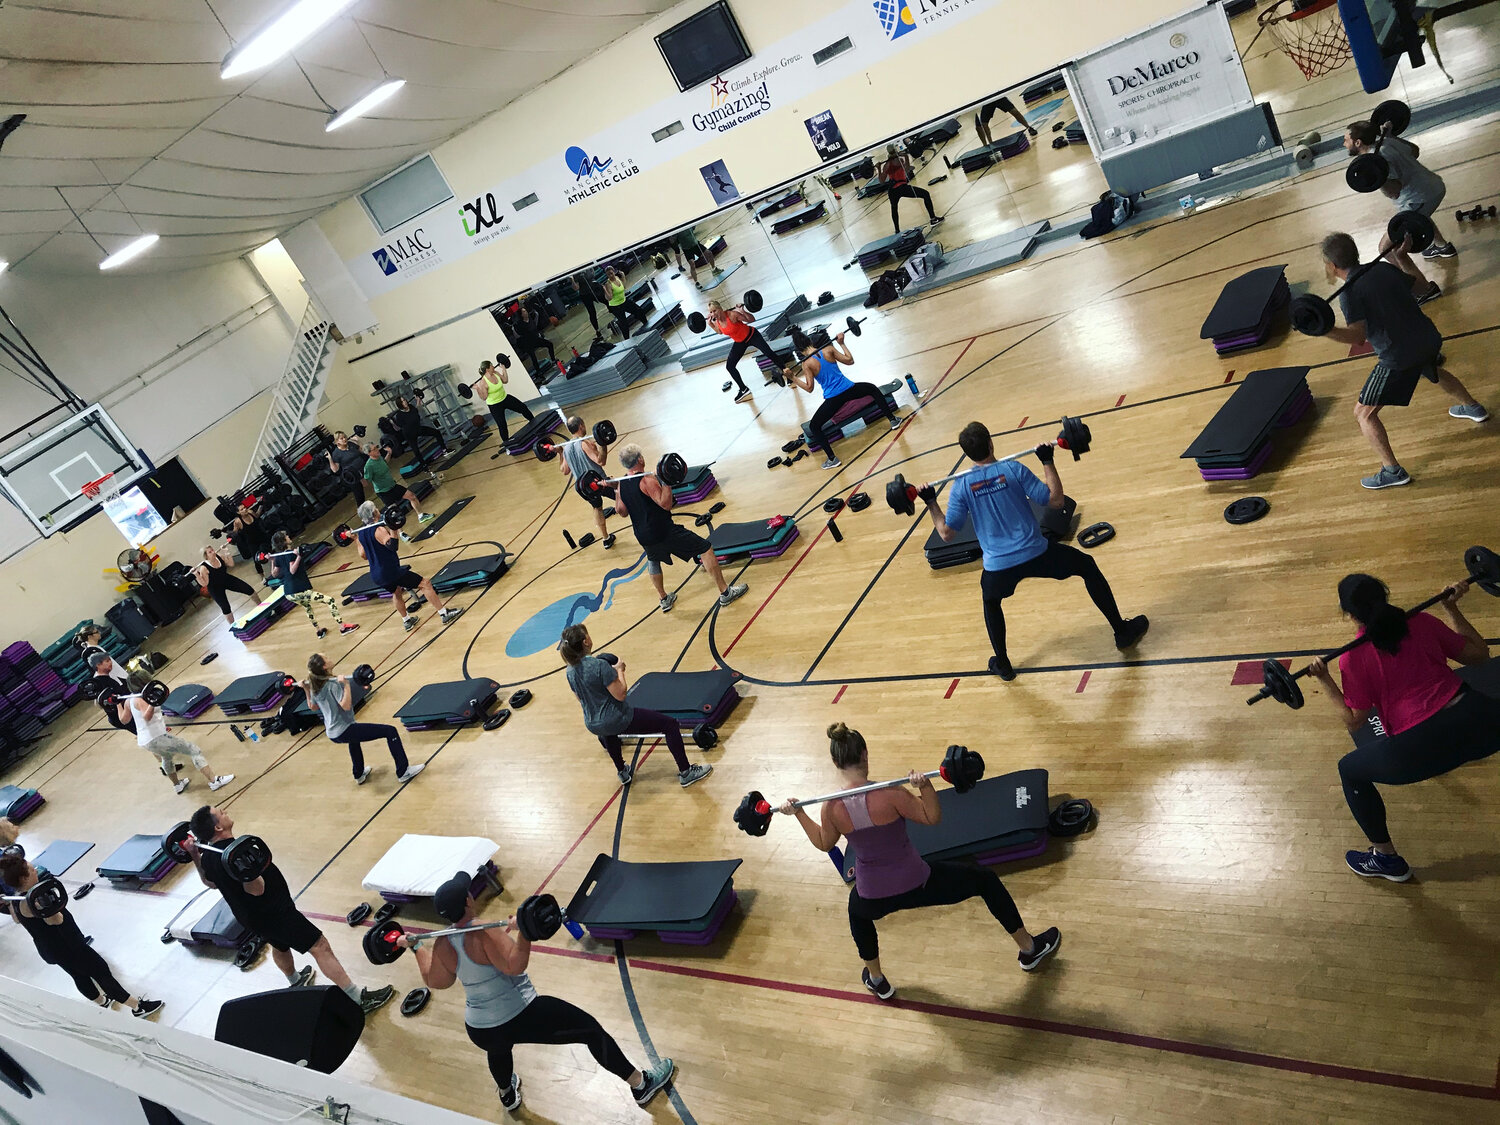 When the MAC closed in late March, the team was worried it would lose momentum of its most popular group fitness classes, like Body Pump, which regularly maxed out at 40-45 people.  During the COVID quarantine, Zoom Body Pump hit as many as 70 participants.